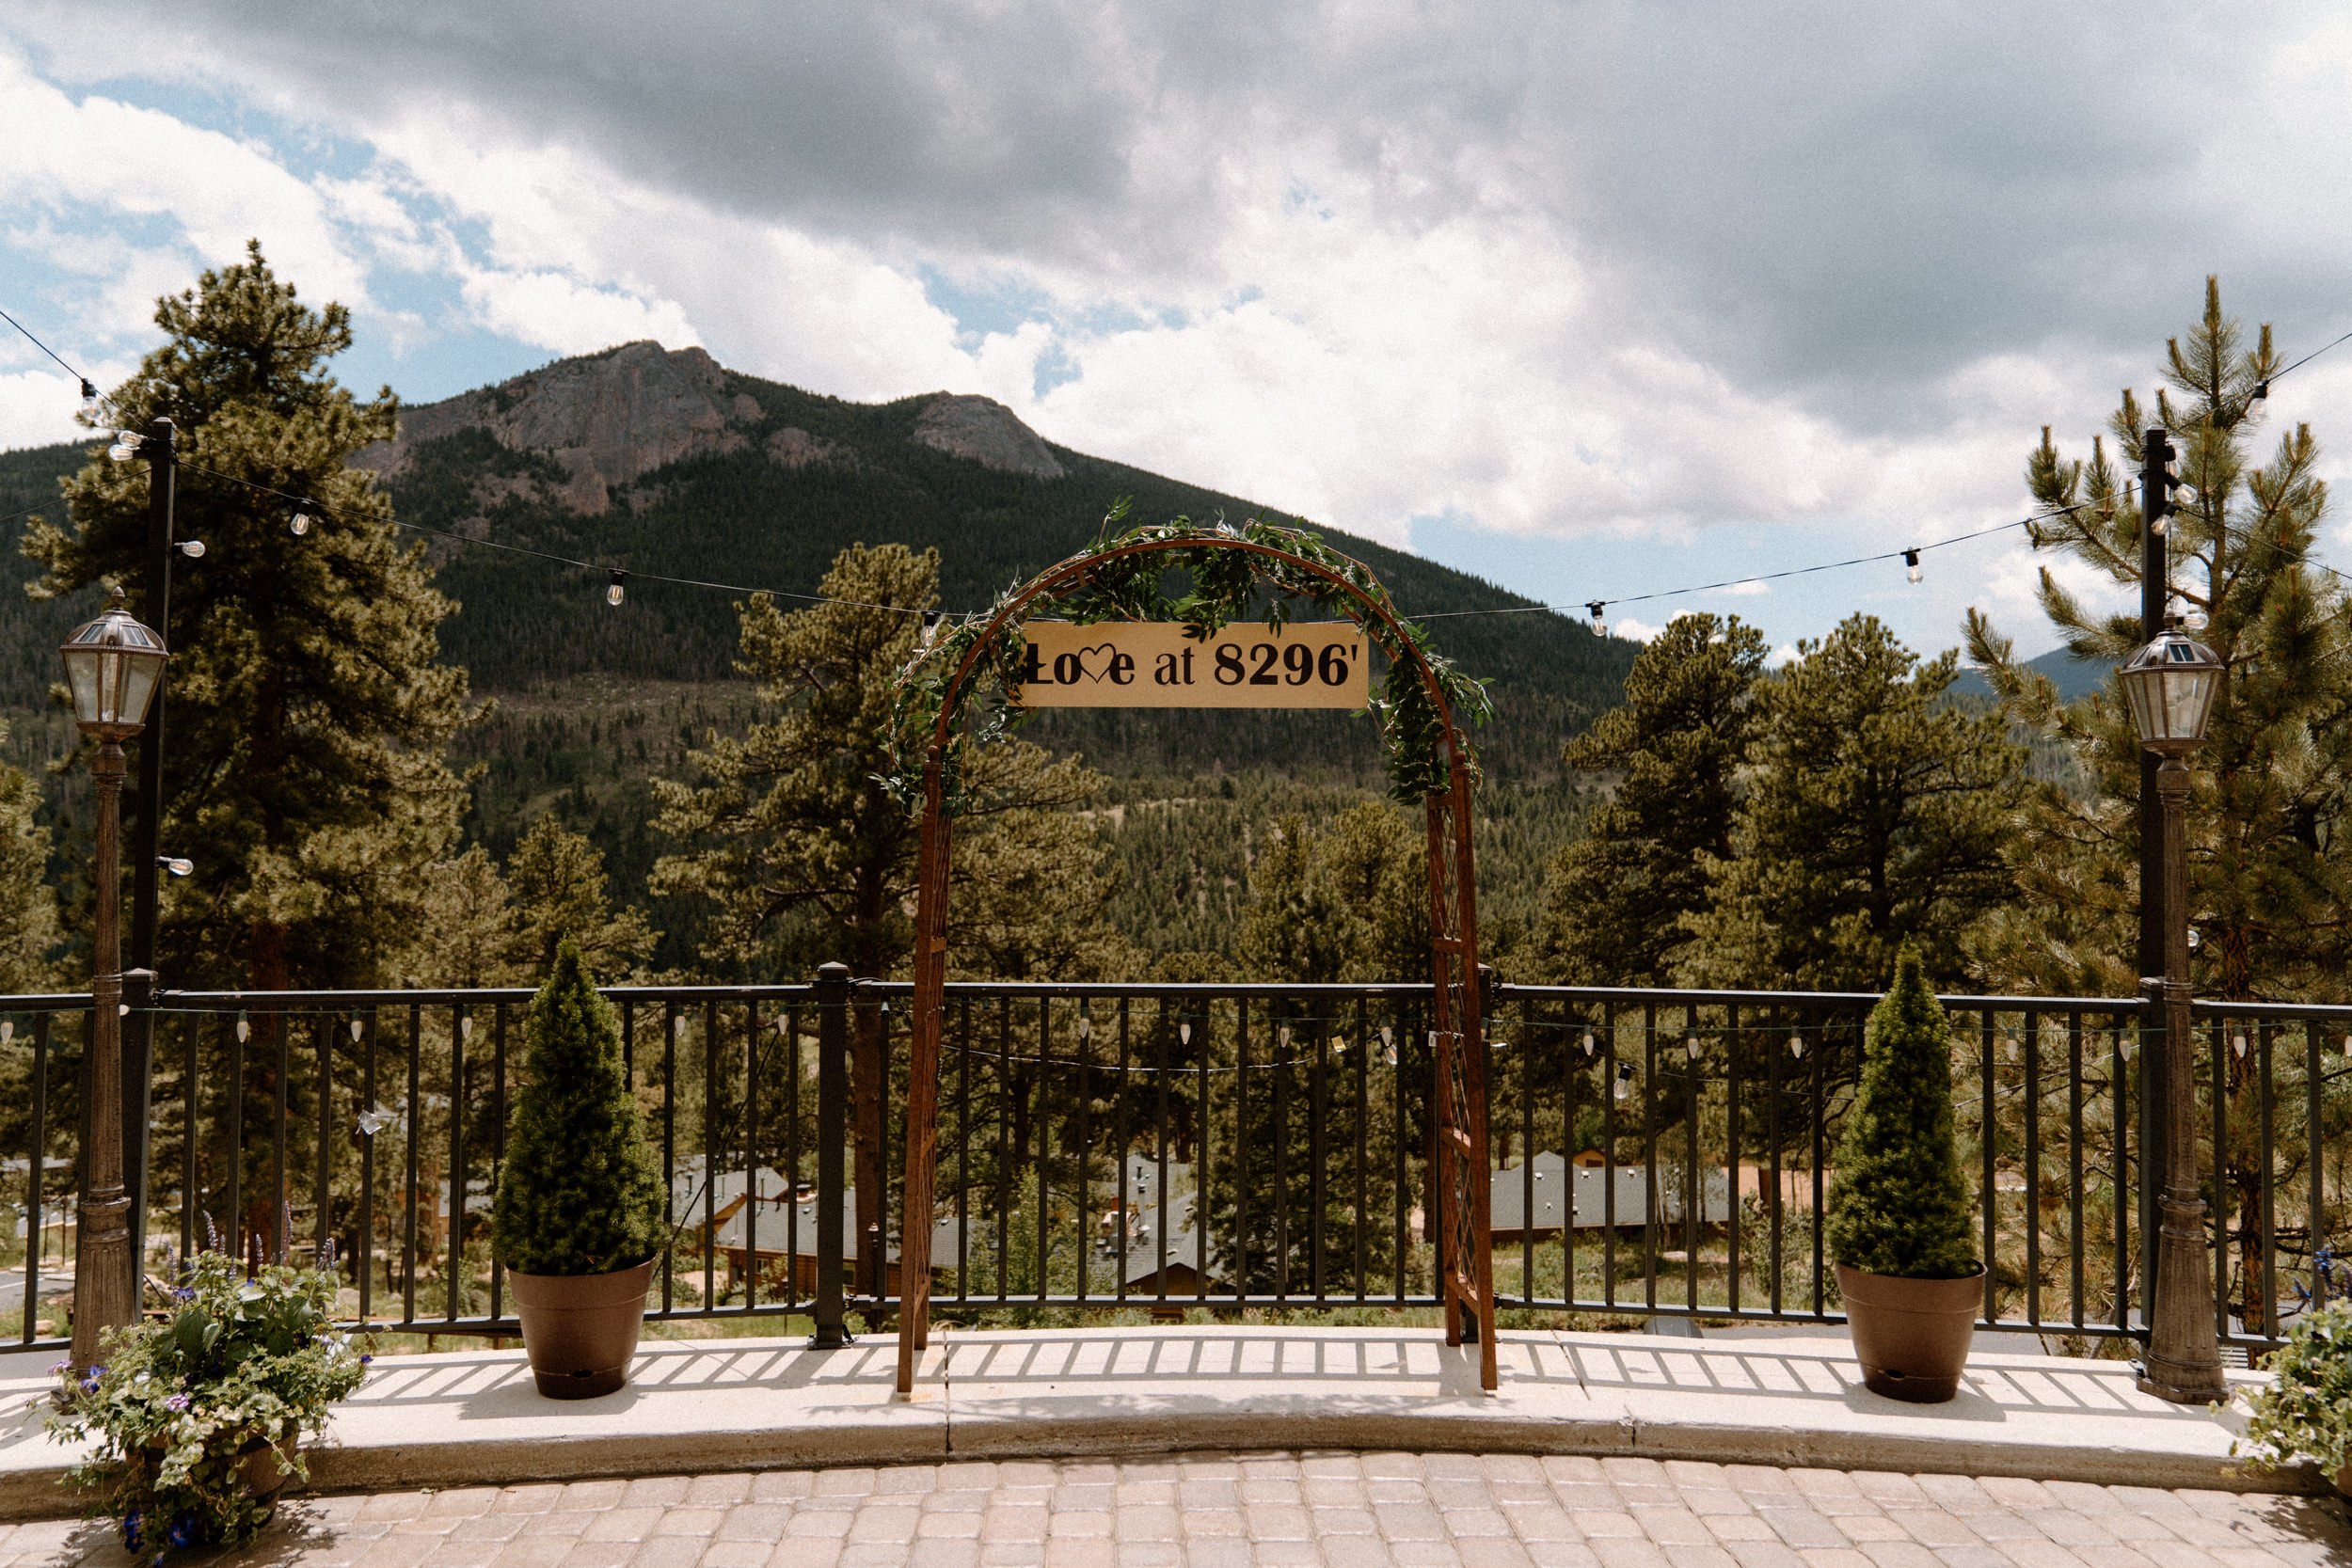 A sign reads "Love at 8296'" at the Della Terra Mountain Chateau in Estes Park, CO